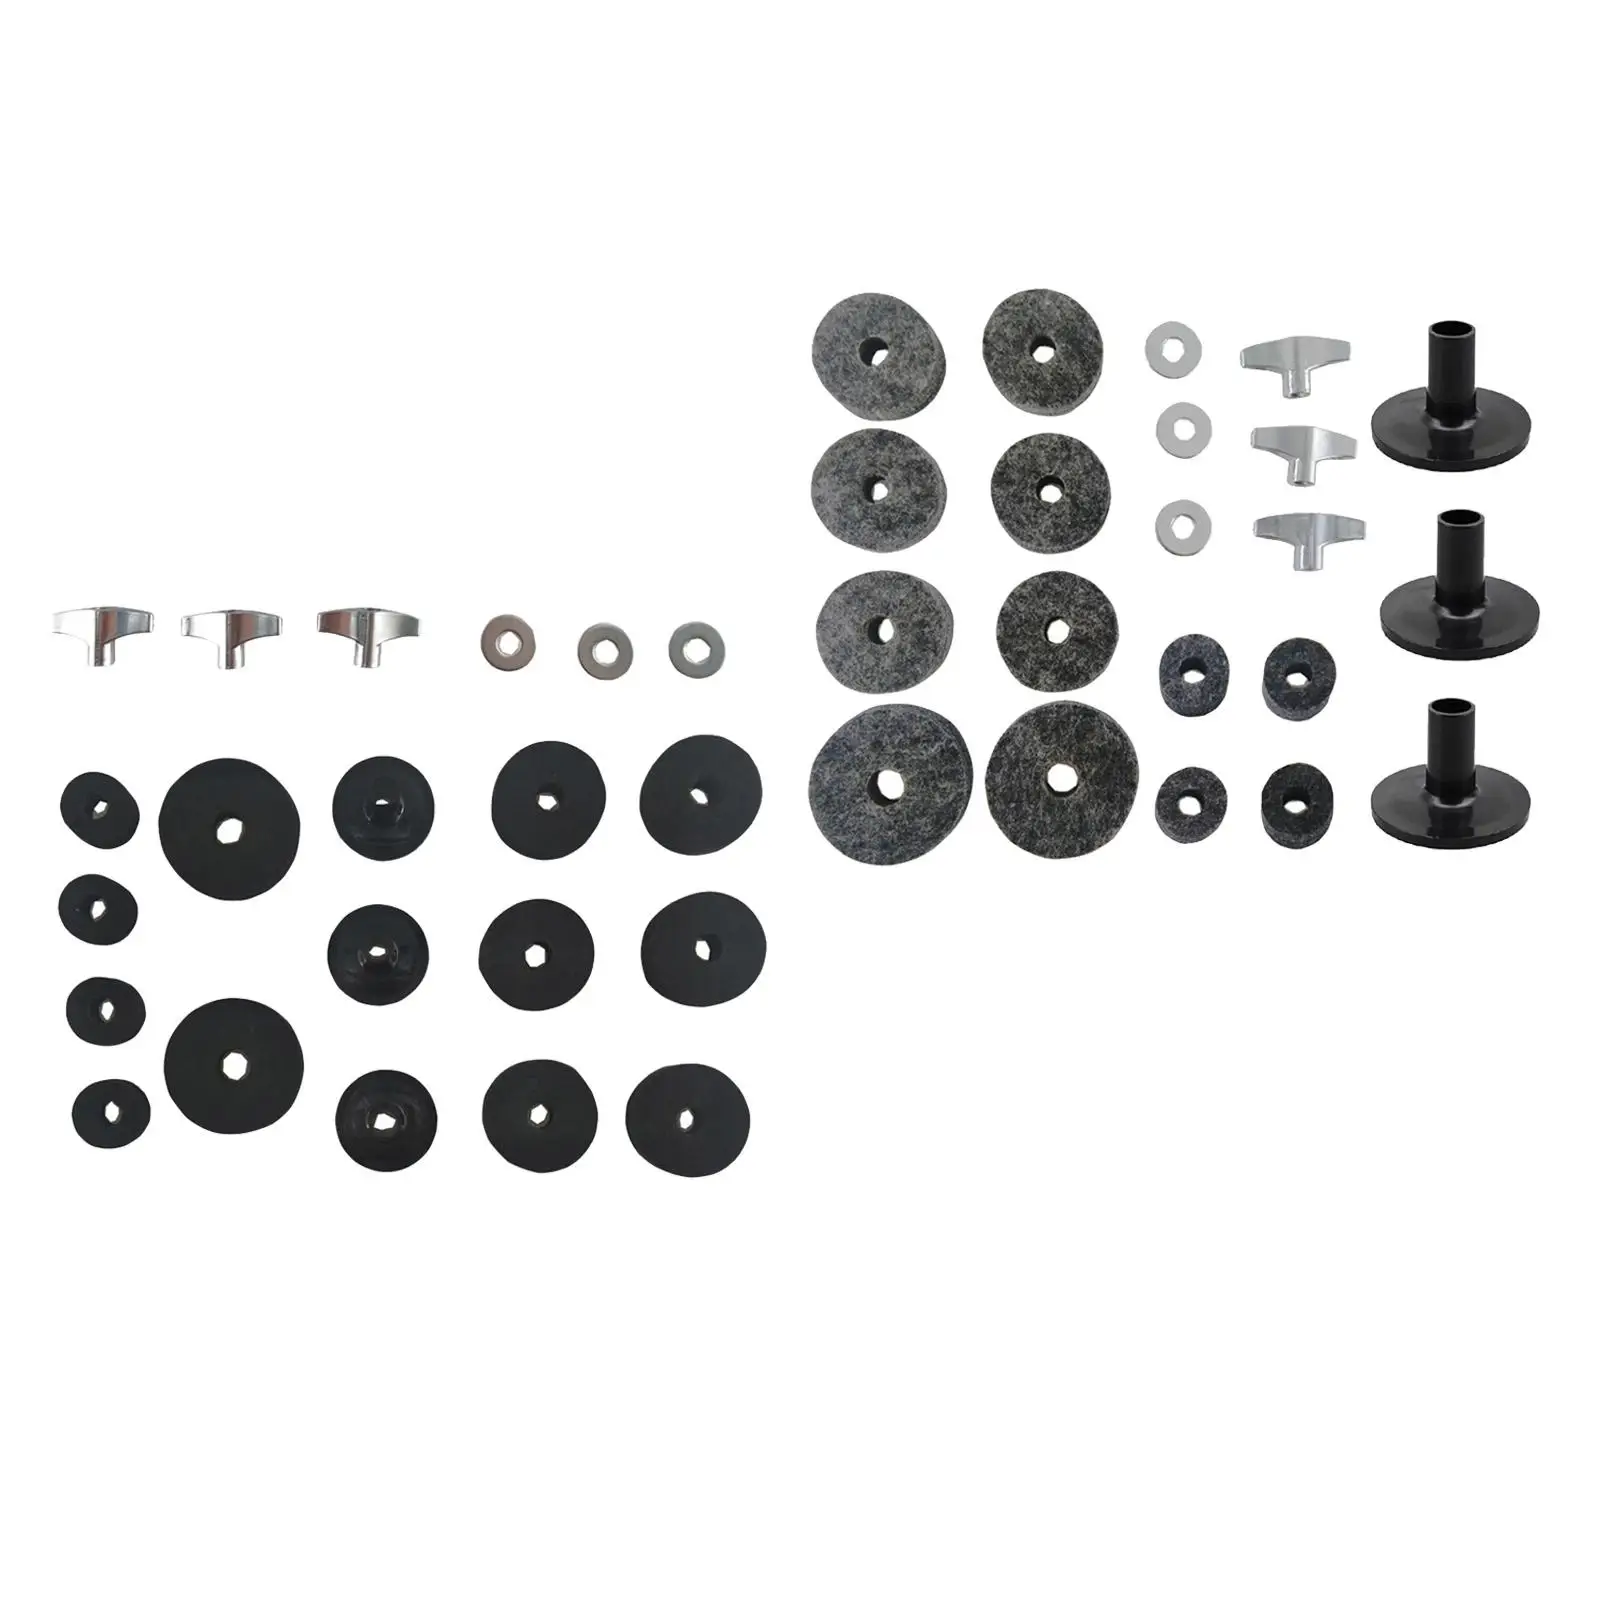 21x Attachment Cymbal Felts Washers Cymbal Replacement Drum Accessories Drum Set